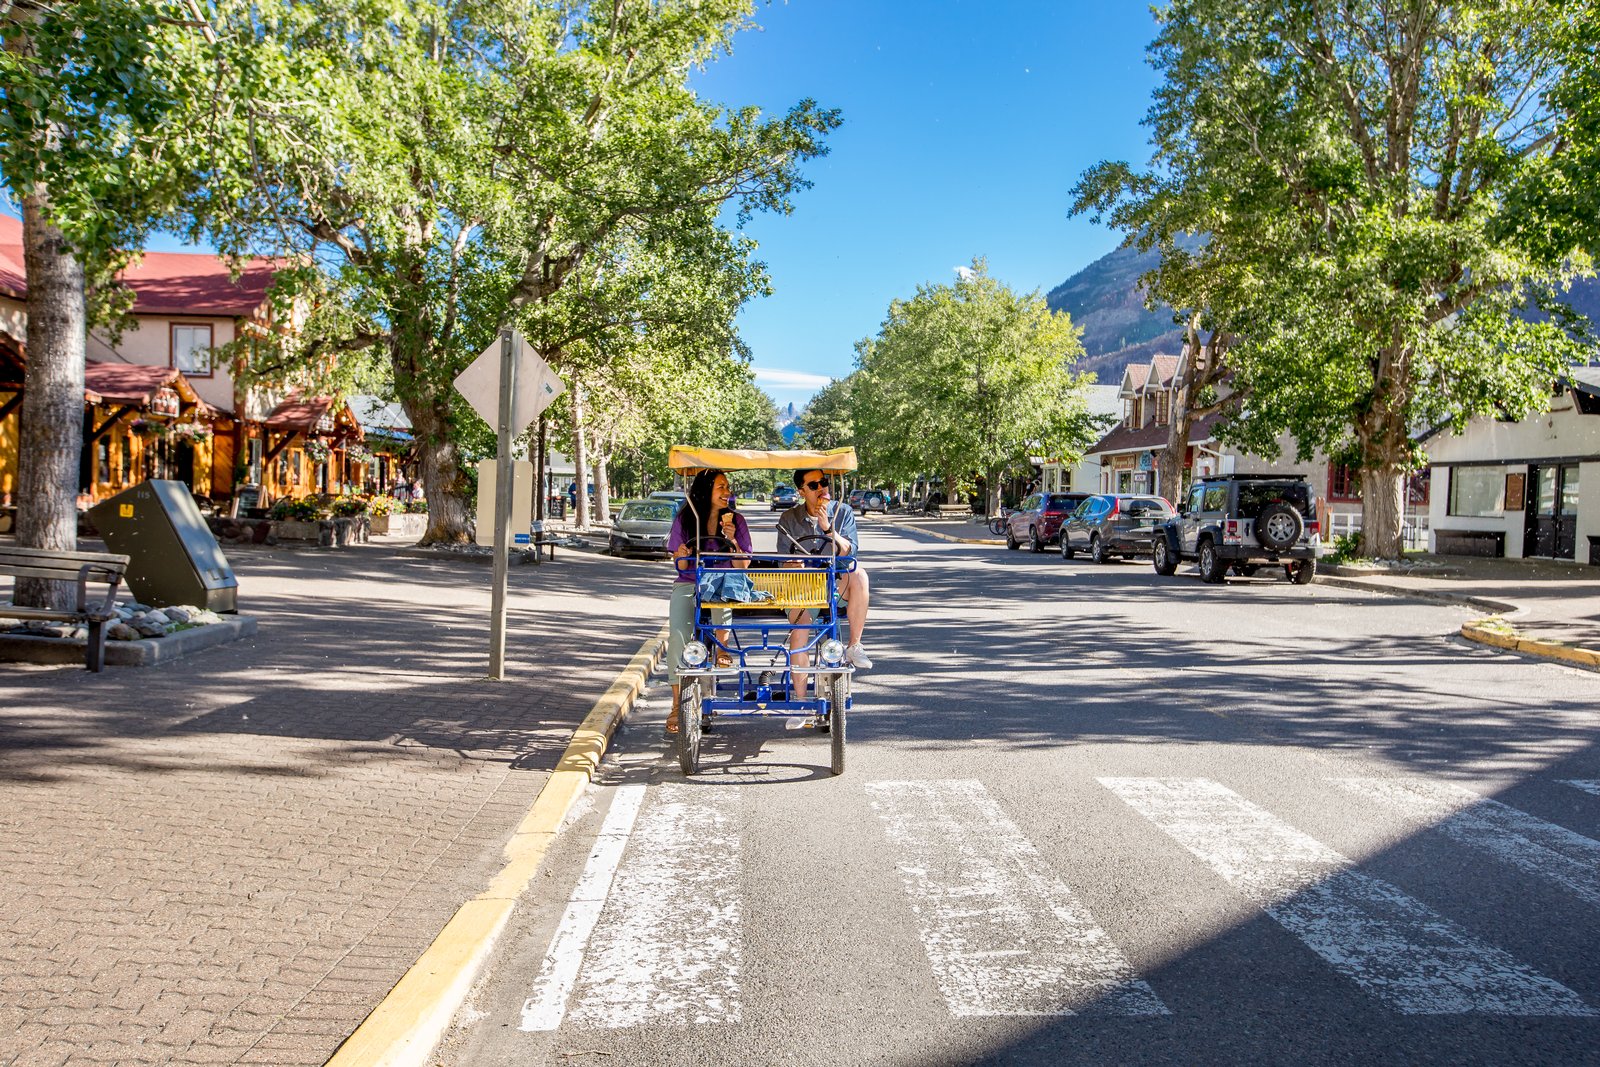 Couple on a two-seater tandem peddle bike driving down street in Waterton Lakes National Park.